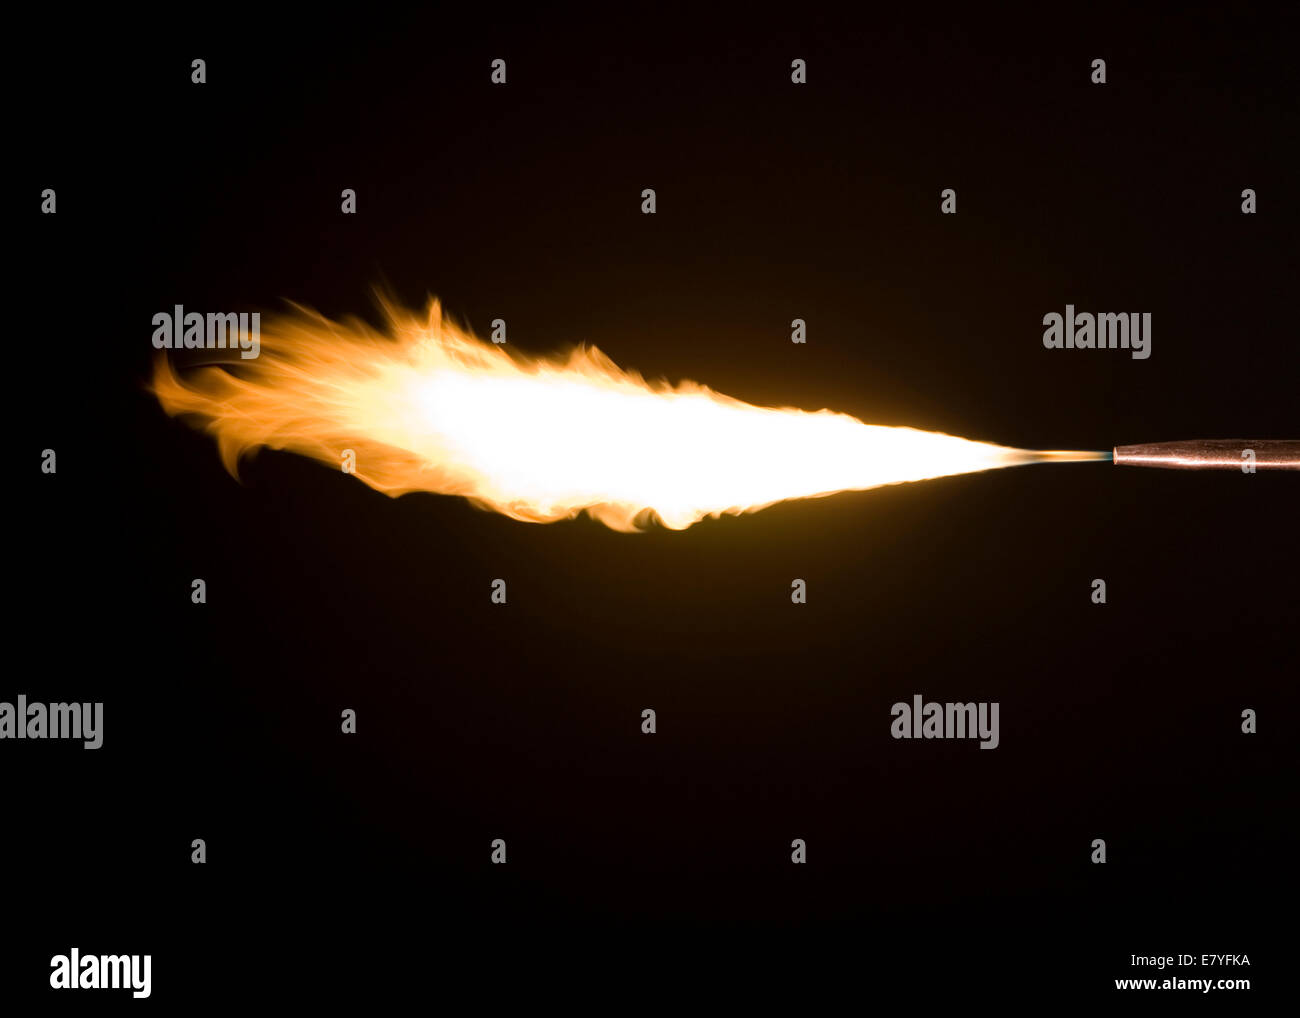 Acetylene from a welding tip burning in air Stock Photo